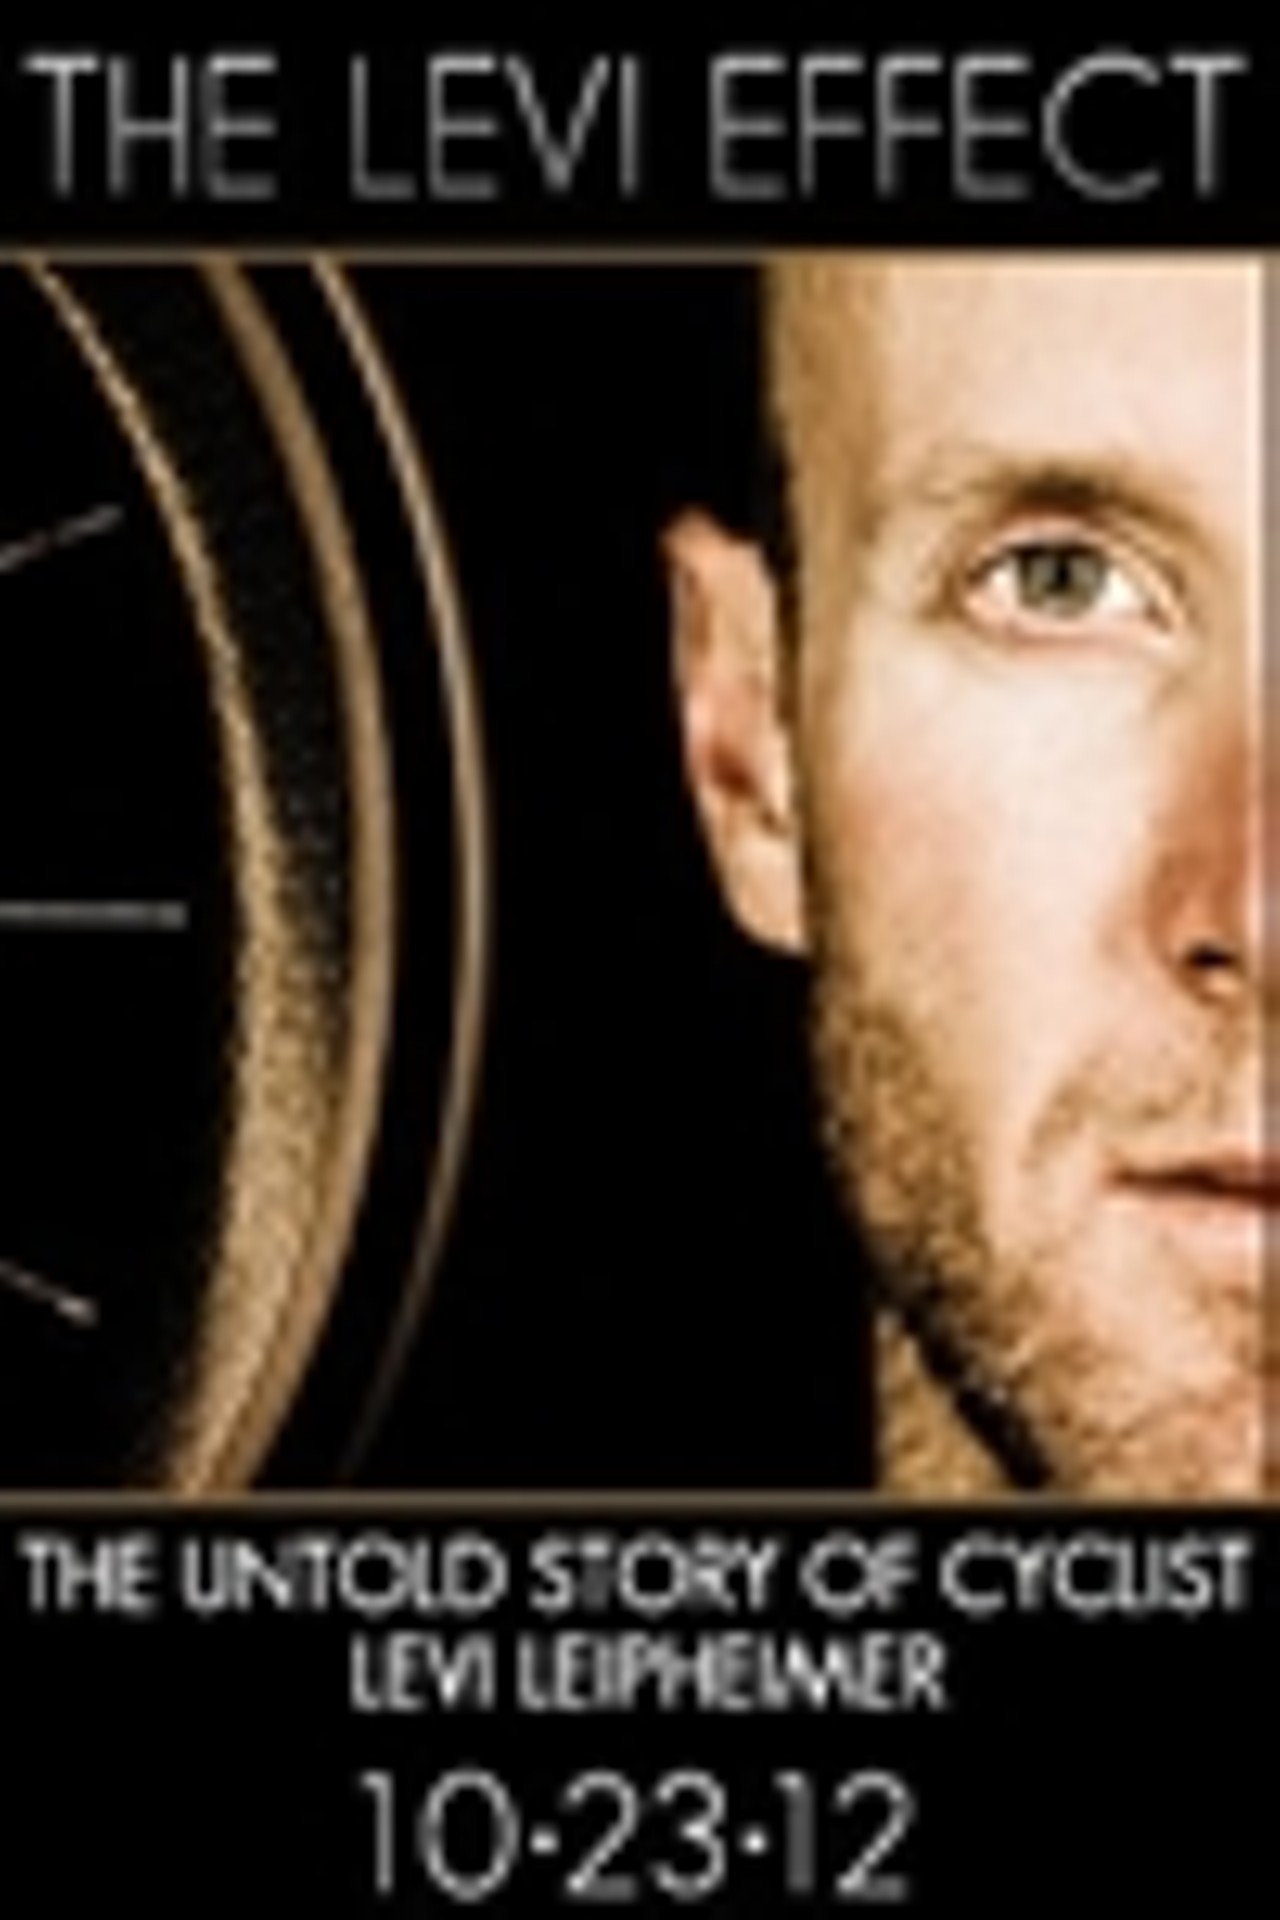 The Story of Levi Leipheimer - The Levi Effect